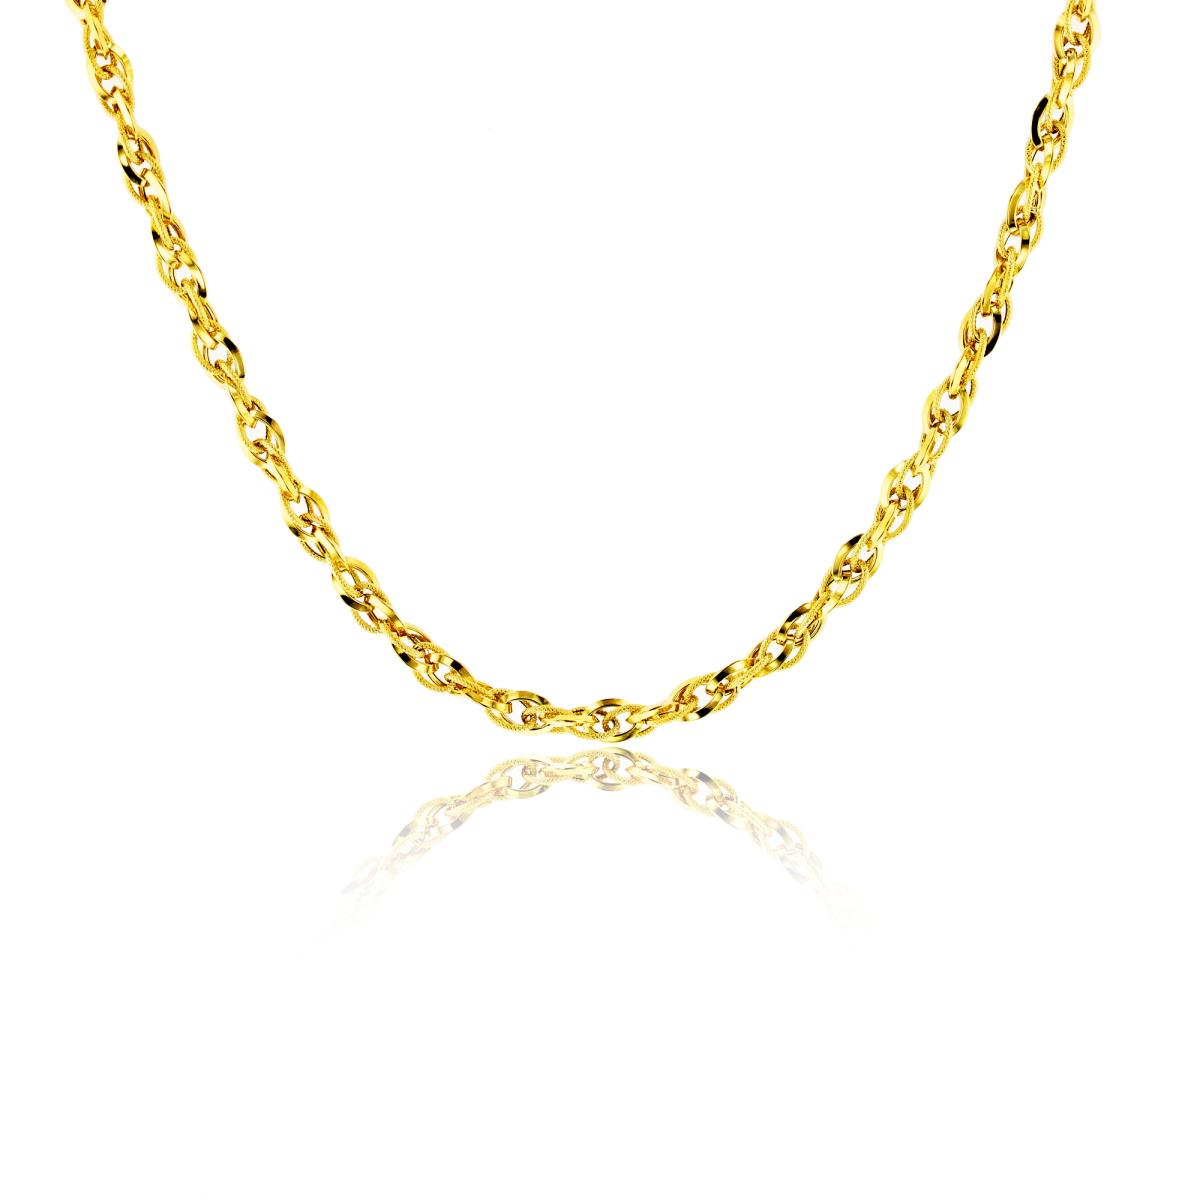 14K Yellow Gold Polished & Textured Triple Oval Linked Italian 19"Necklace